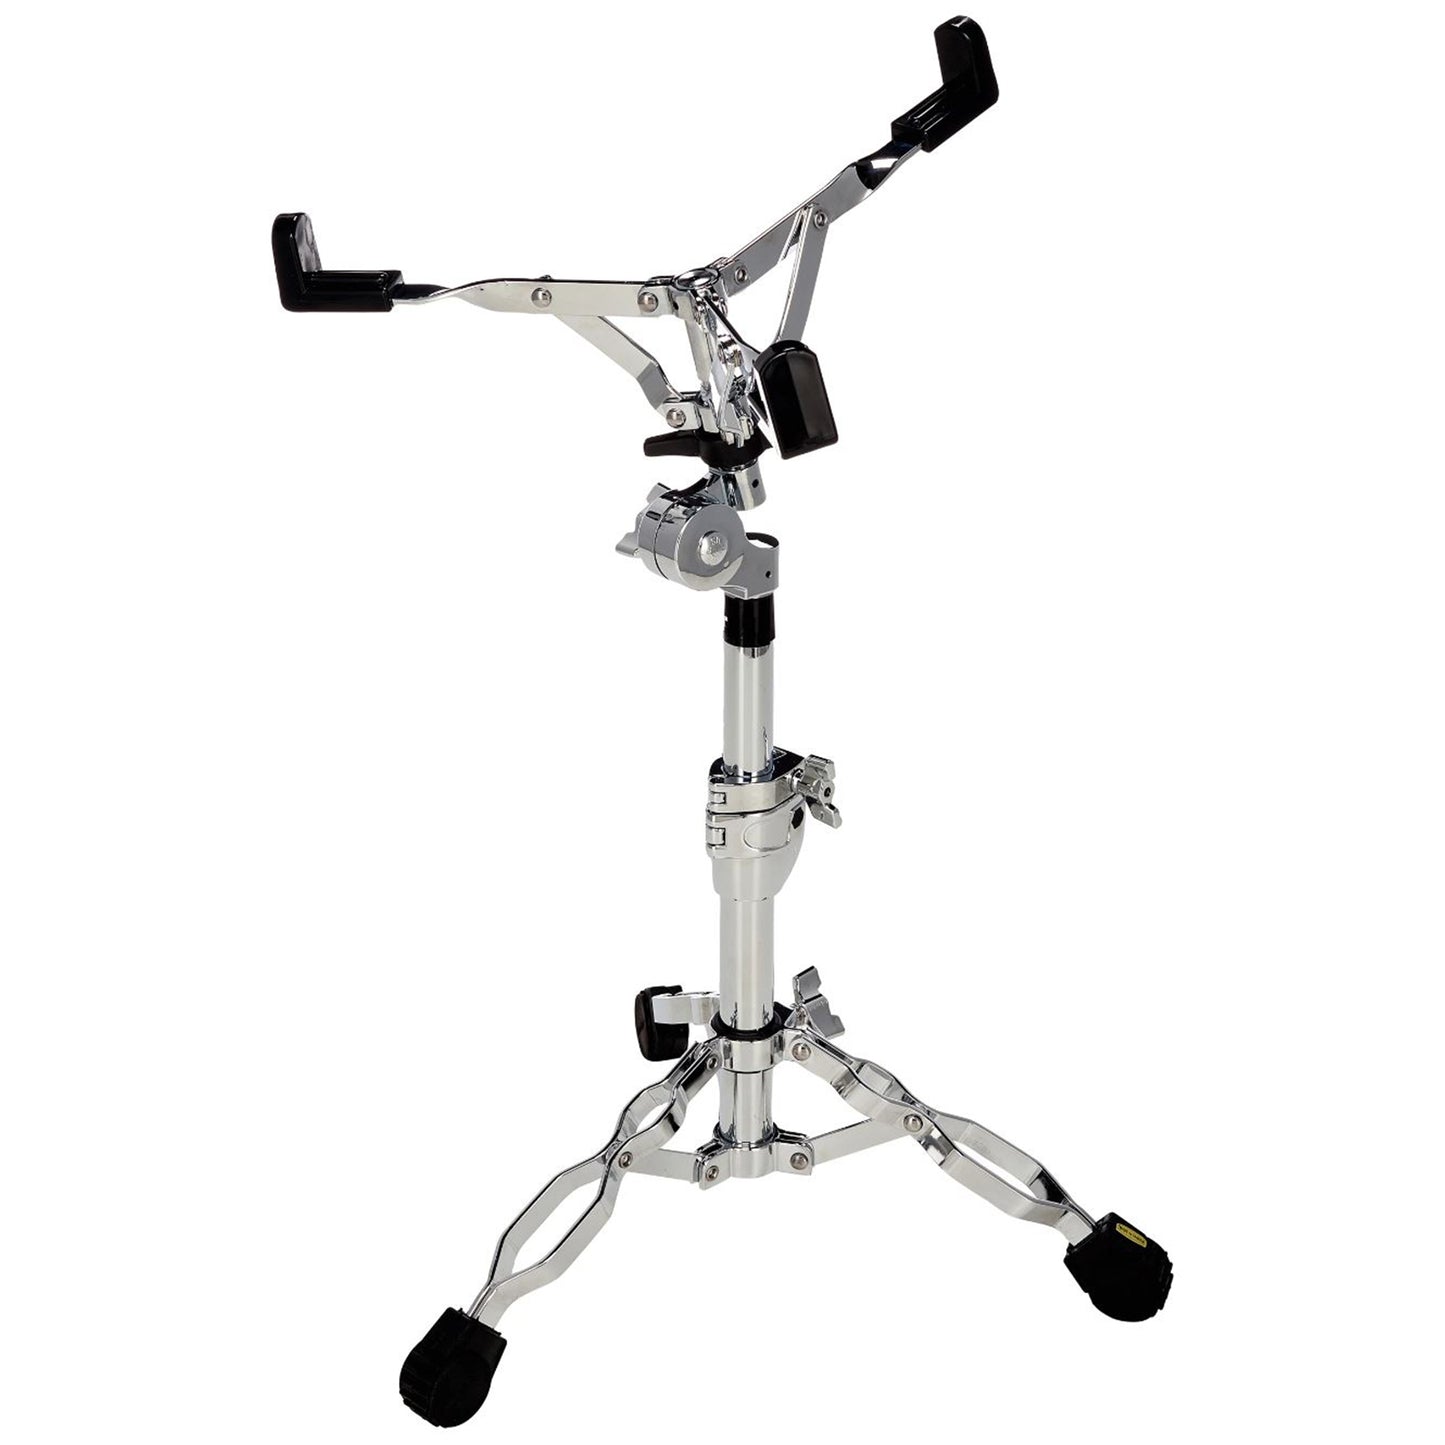 Gibraltar Heavy Duty Snare Drum Stand Double Braced with Adjustable Height, Gearless Brake Tilter for Drums Pro Series (Extended Version Available) | 6706, 6706EX